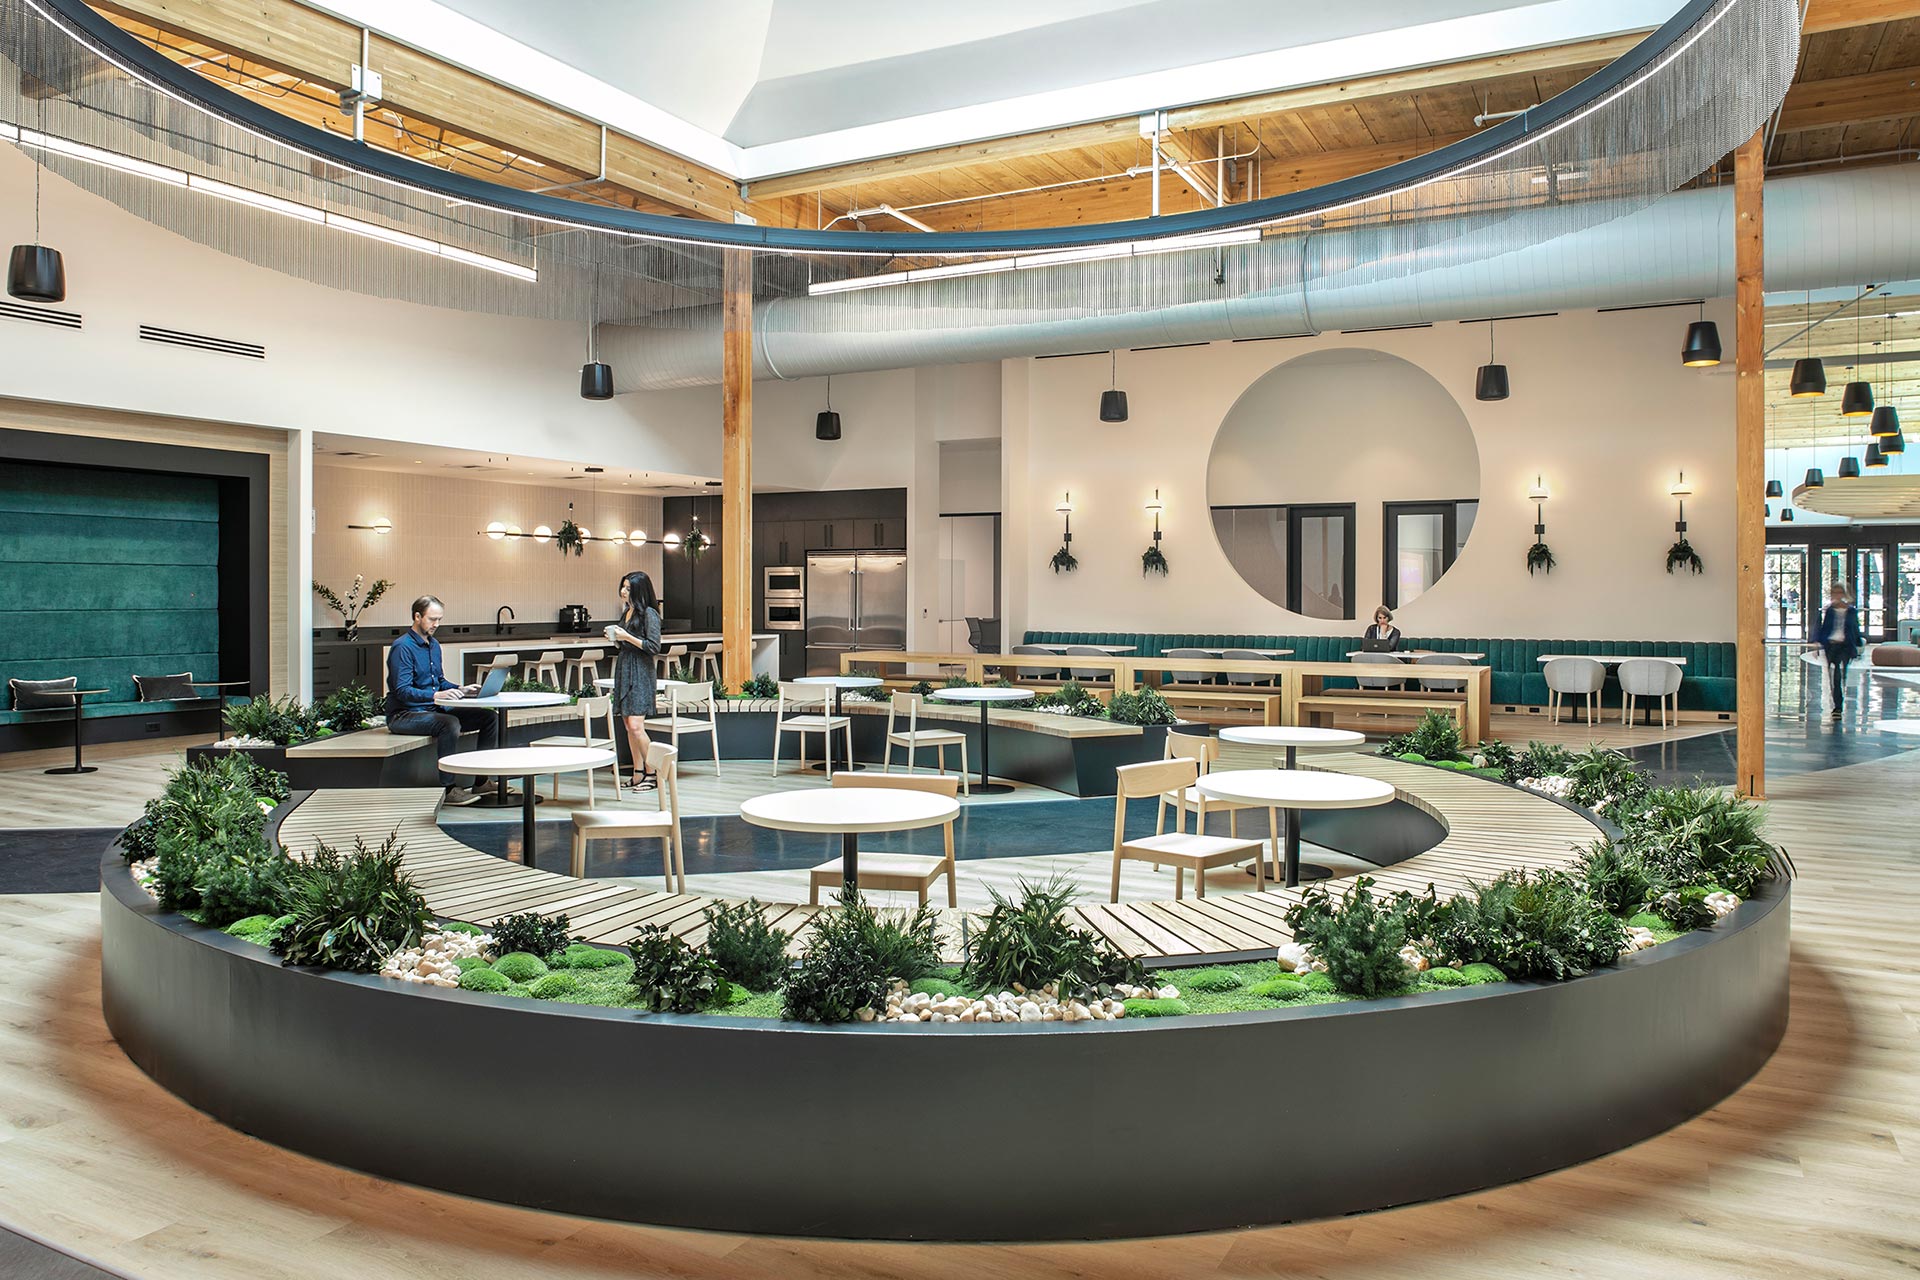 Interior at Twist Bioscience breakroom, eatery, kitchen, with skylight, circular central seating/biophilia feature